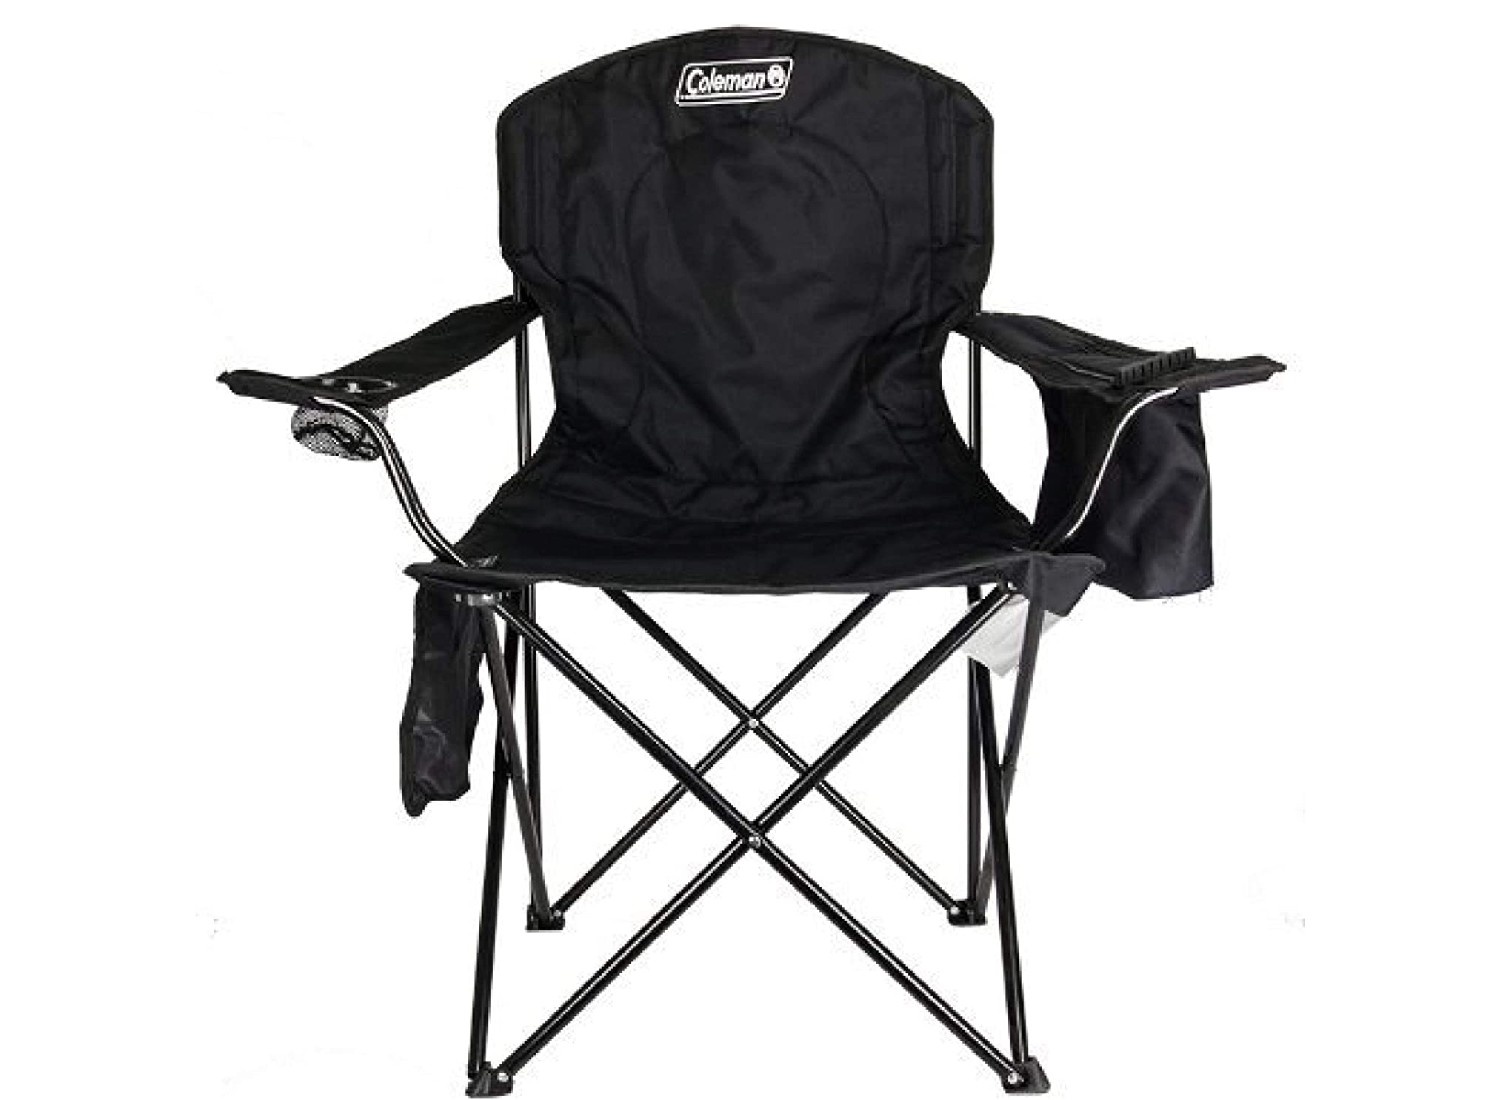 outdoor fishing chair reviews